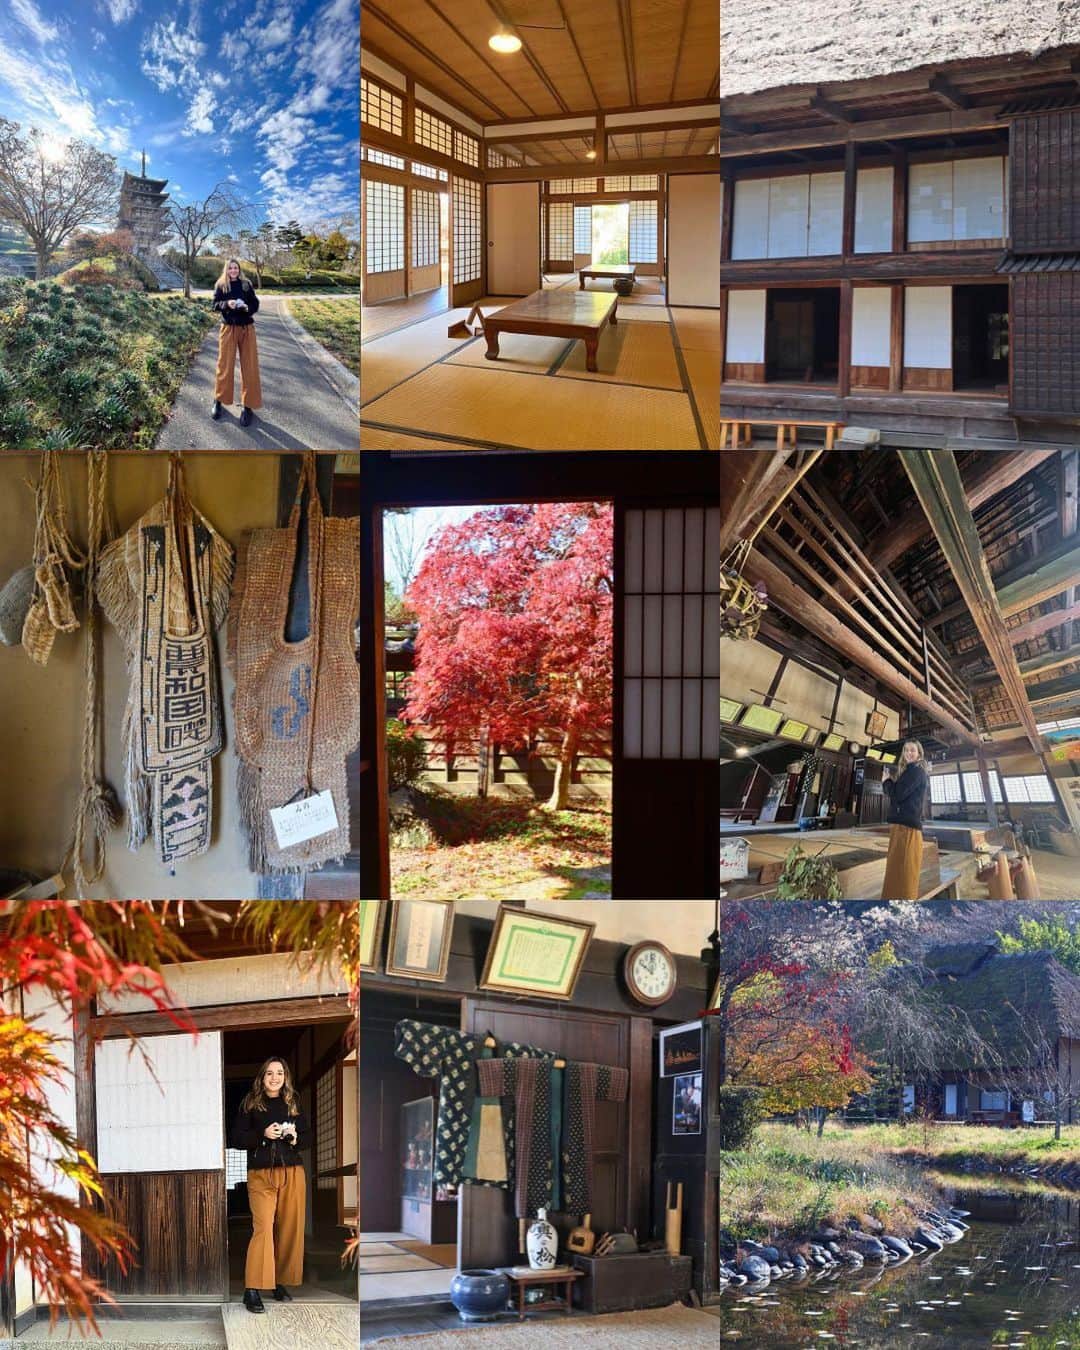 Rediscover Fukushimaさんのインスタグラム写真 - (Rediscover FukushimaInstagram)「Last days of autumn in central Fukushima! 🍁 It is now getting colder and colder, and winter is fast approaching!   1 & 2: Adachigahara Furusato Village 🛖 An open-air museum and garden in Nihonmatsu. Yesterday, we visited and explored a samurai house and a rural kominka (traditional home). Also, there is a big play area for children onsite! During spring and summer, this park brims with flowers, so we would recommend visiting during spring next year to enjoy beautiful views! 🌼  3 & 4: Ja no Hana Gardens 🌹 A wide park located in Motomiya with lots of seasonal attractions. In spring, this place is famous for wisteria, while lotus flowers bloom beautifully in the summer. During autumn, the foliage colors look stunning, and there are roses in bloom now too! Also, there is an illumination event until November 19th (this Sunday!). 😊  5 & 6: Nihonmatsu Chrysanthemum Doll Festival 👘 Each year from October to November, a colorful flower festival brightens up the Kasumigajo Castle grounds at Nihonmatsu. This year, the Chrysanthemum Doll Festival goes until Sunday November 19th (this weekend!). If you visit, be sure to stop by the traditional teahouse onsite to enjoy matcha and wagashi (traditional Japanese confectioneries) while contemplating the beautiful foliage. 🍁  If you are interested in seeing more, you can find our livestreams at each of these places on our Facebook page! And please be sure to save this post for your next visit! 🔖   #fukushima #visitfukushima #visitjapanjp #visitjapanus #japantravel #japantrip #beautifuljapan #autumninjapan #nihonmatsu #japanese #beautifuldestinations #tohoku #tohokutrip #visitjapanau #visitjapantw #visitjapanca #visitjapanfr #visitjapanes #adachigaharafurusatovillage #janohana #kasumigajocastlepark #nihonmatsuchrysanthemum #chrysanthemum #traditionaljapan」11月16日 15時36分 - rediscoverfukushima